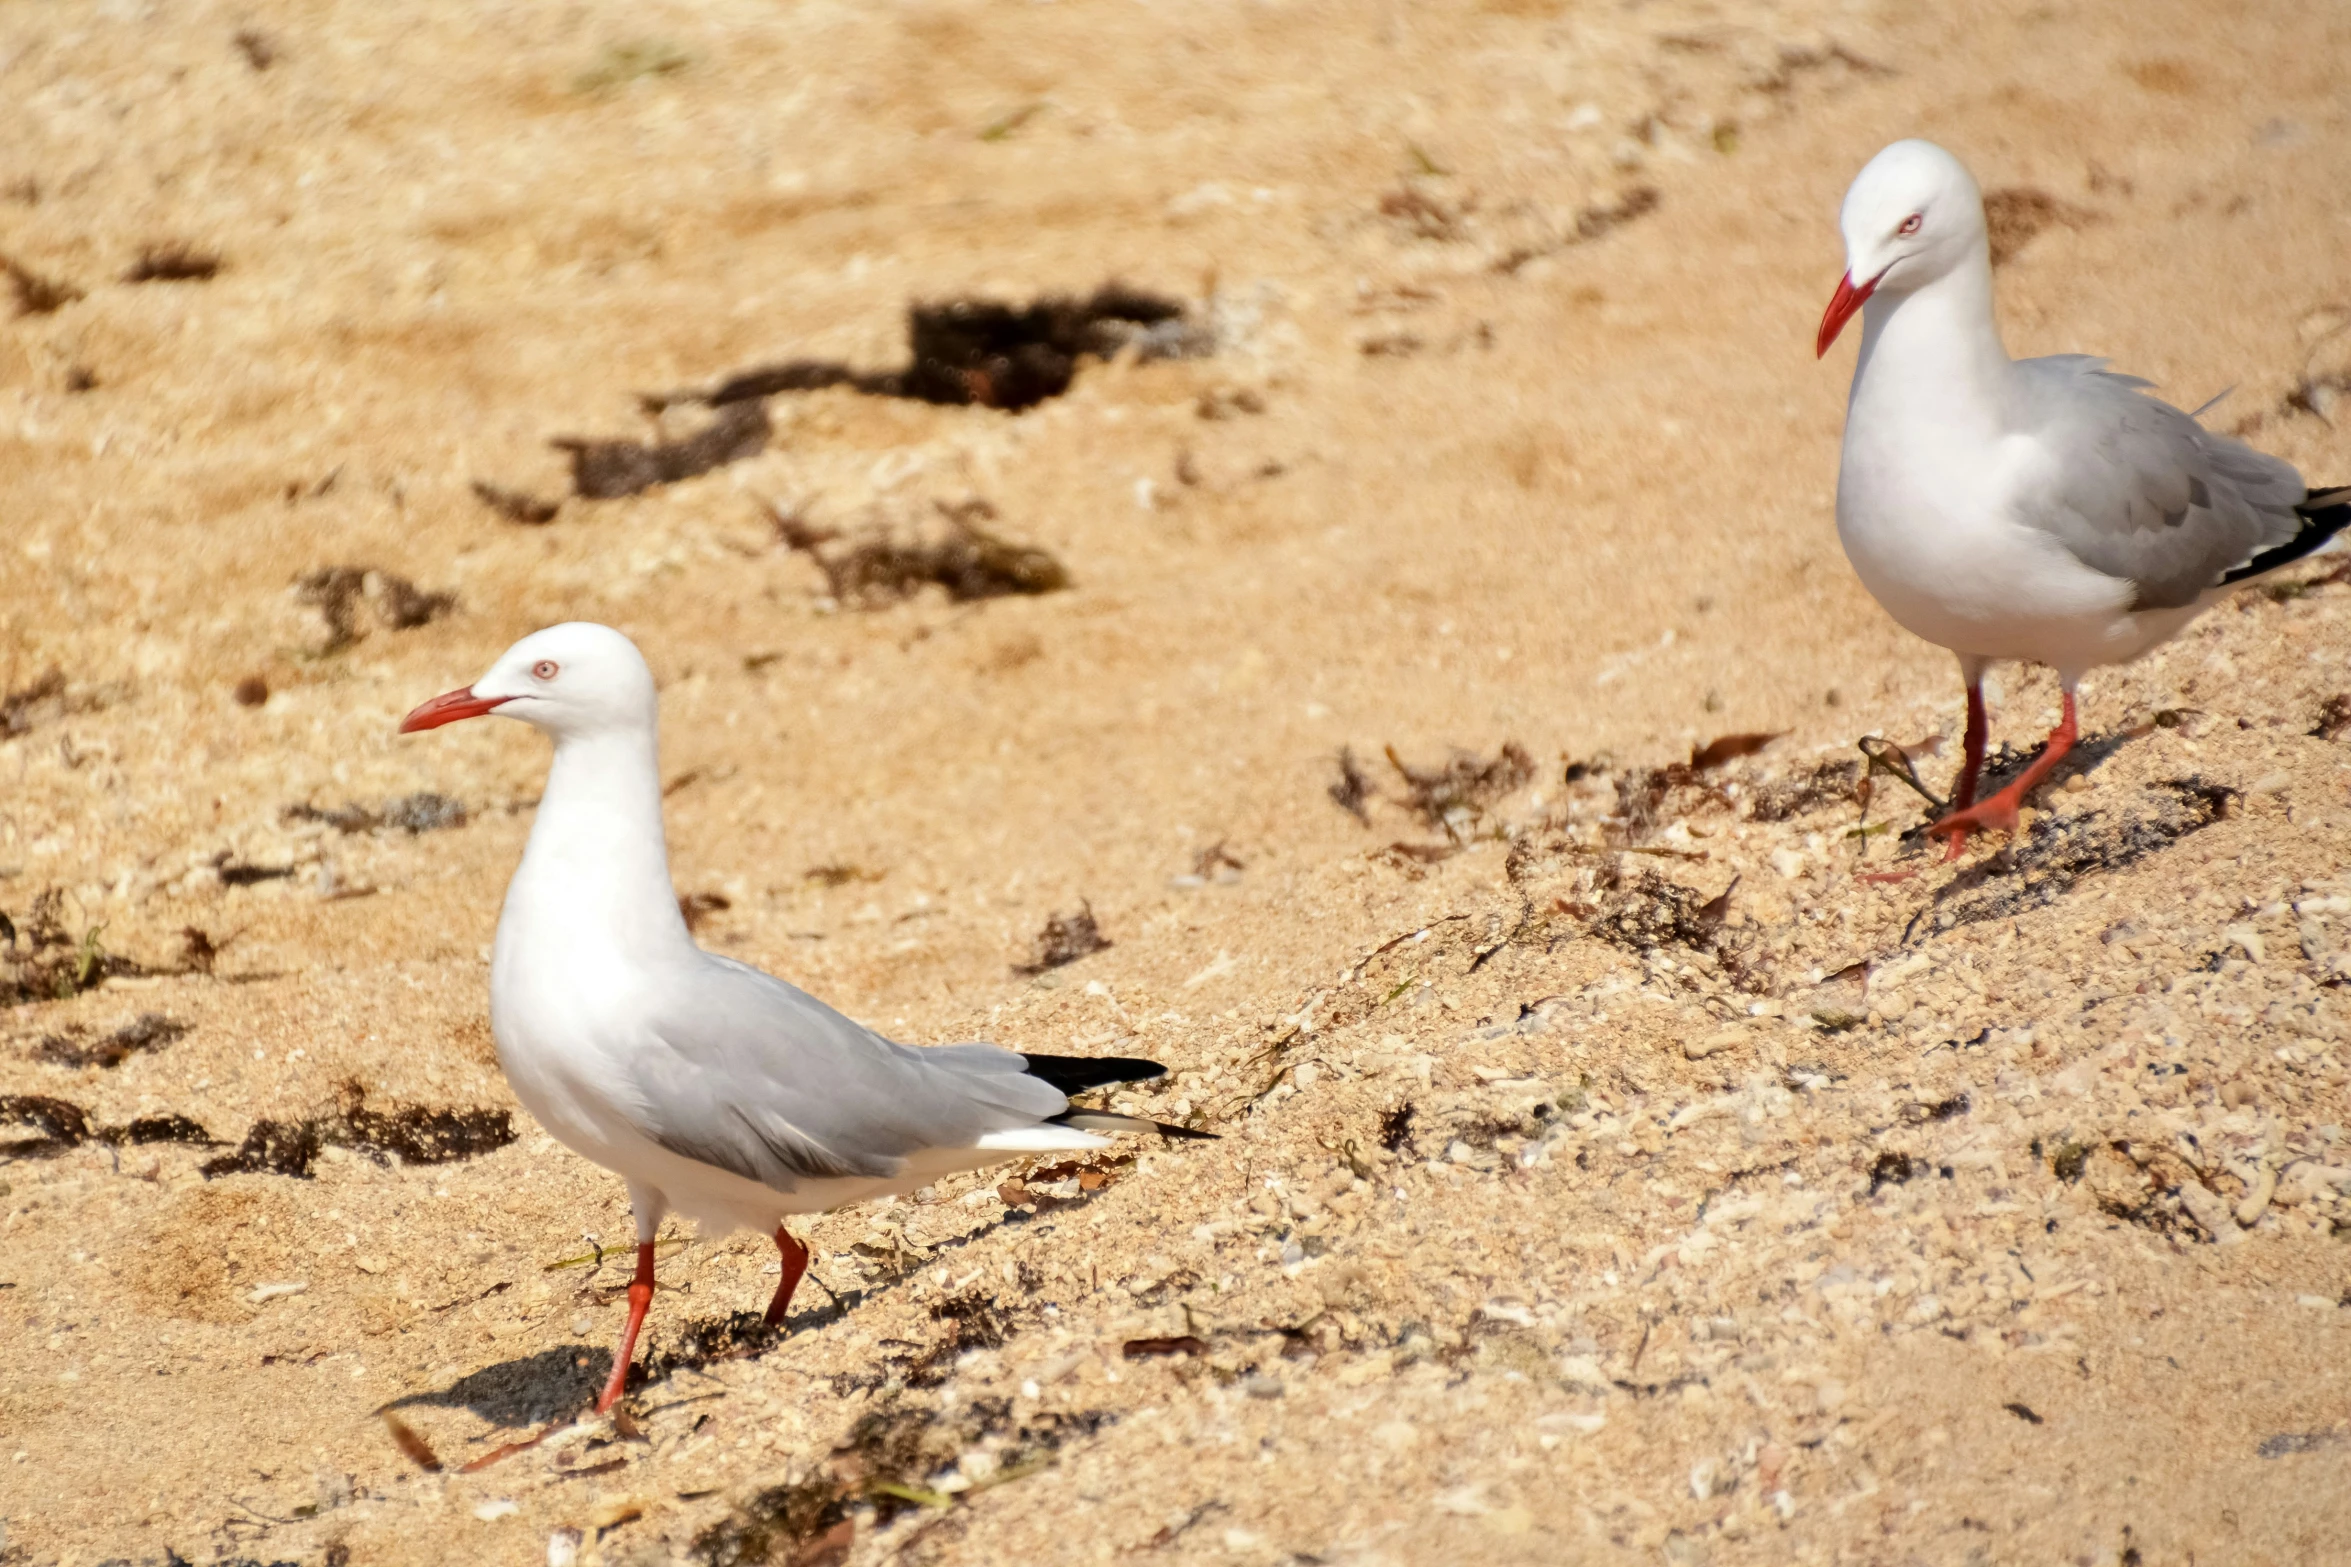 two white birds standing on the sand near each other